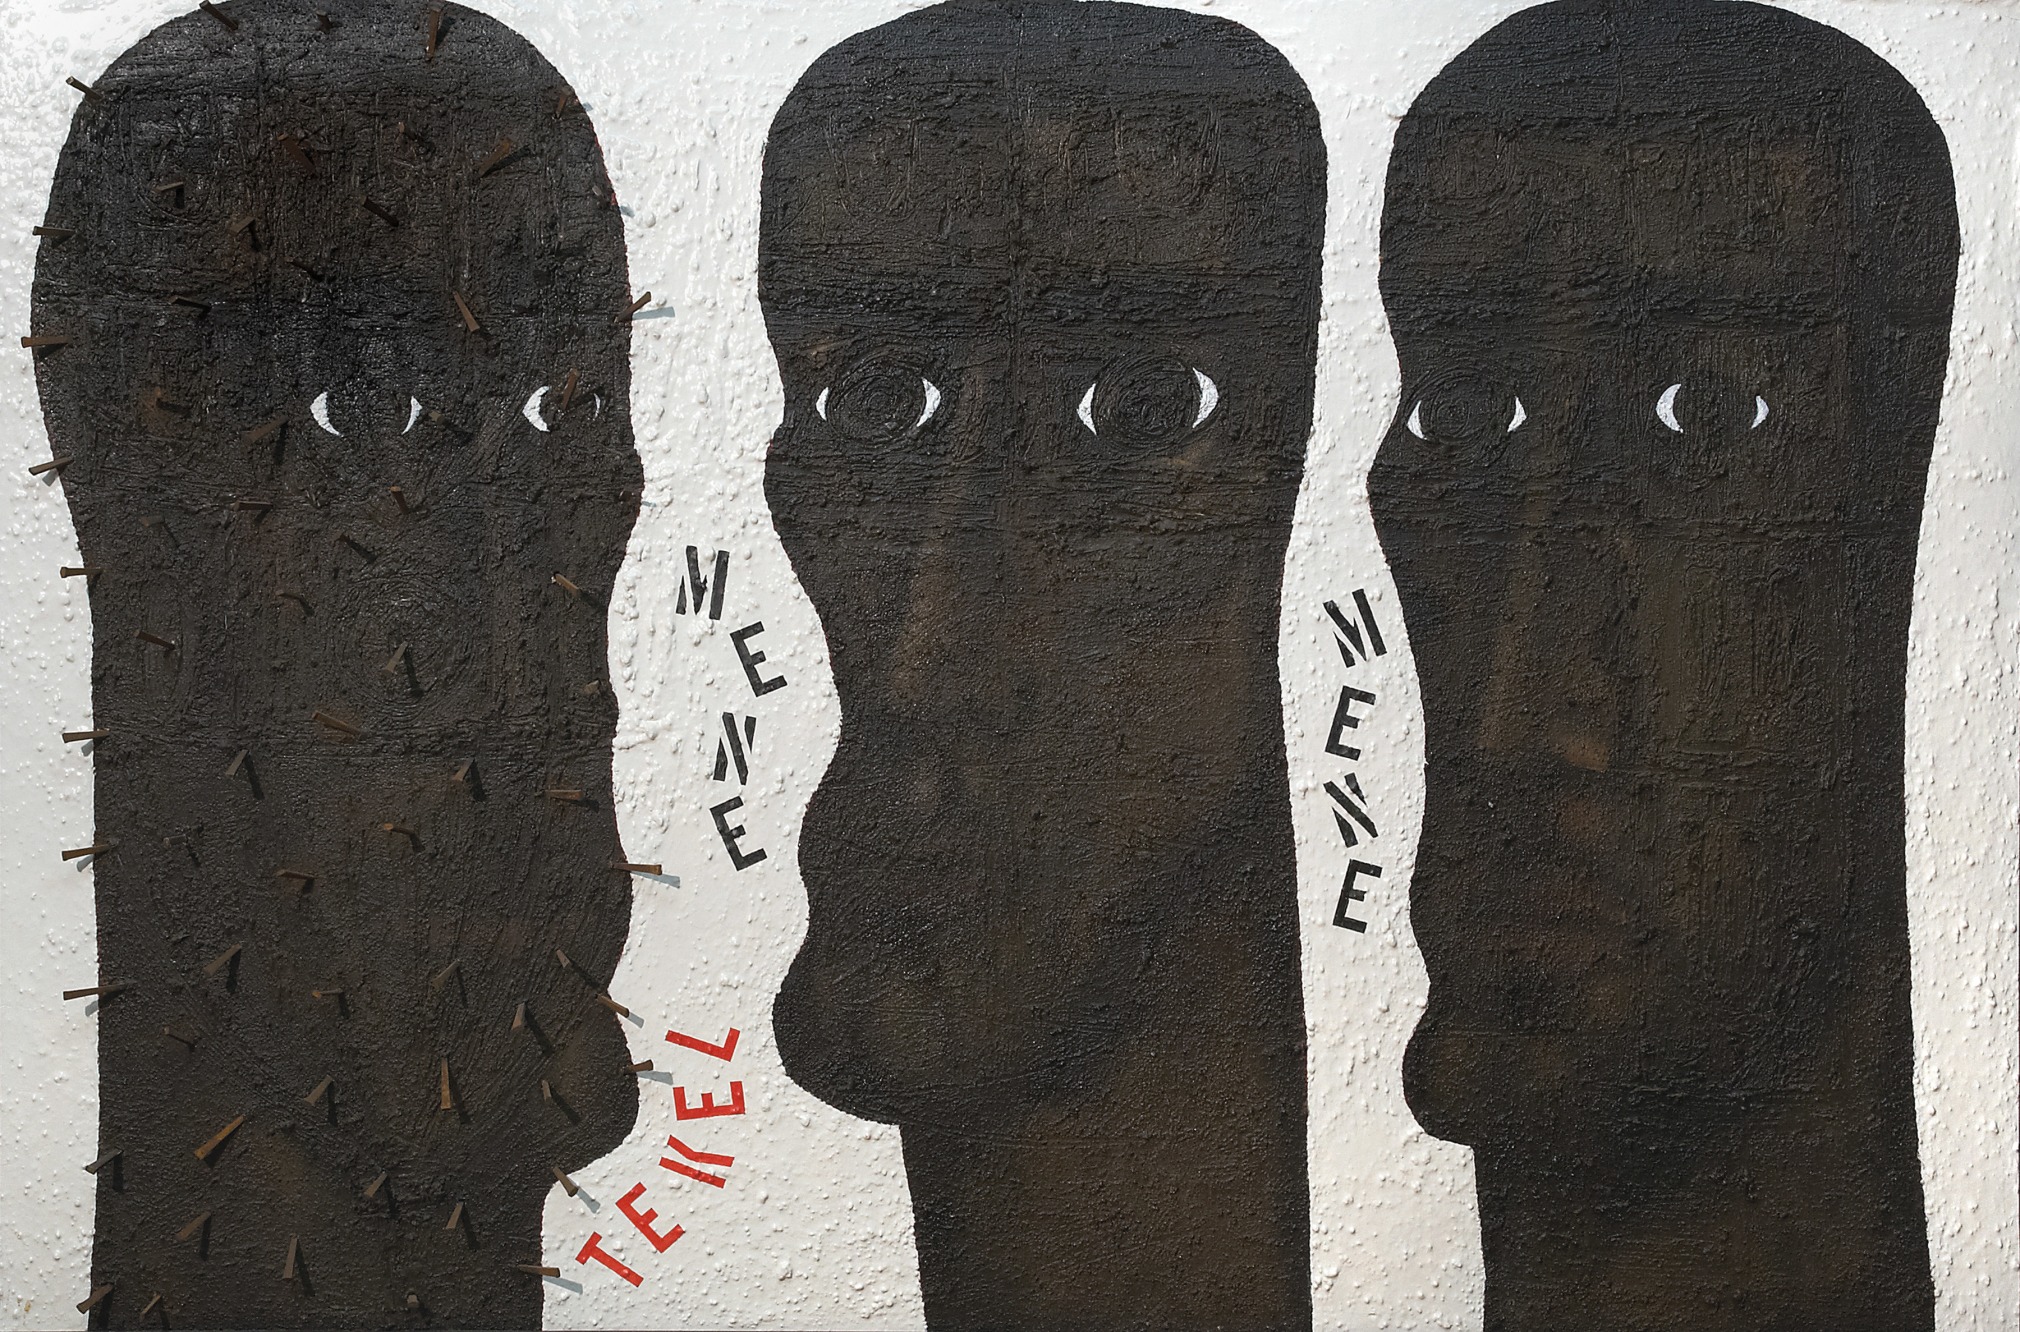 Mene Mene Tekel, a painting comprised of three dark brown totem like heads, the first has nails in it. In between the first two heads are the words Mene and Tekel; in between the second two heads is the word Mene